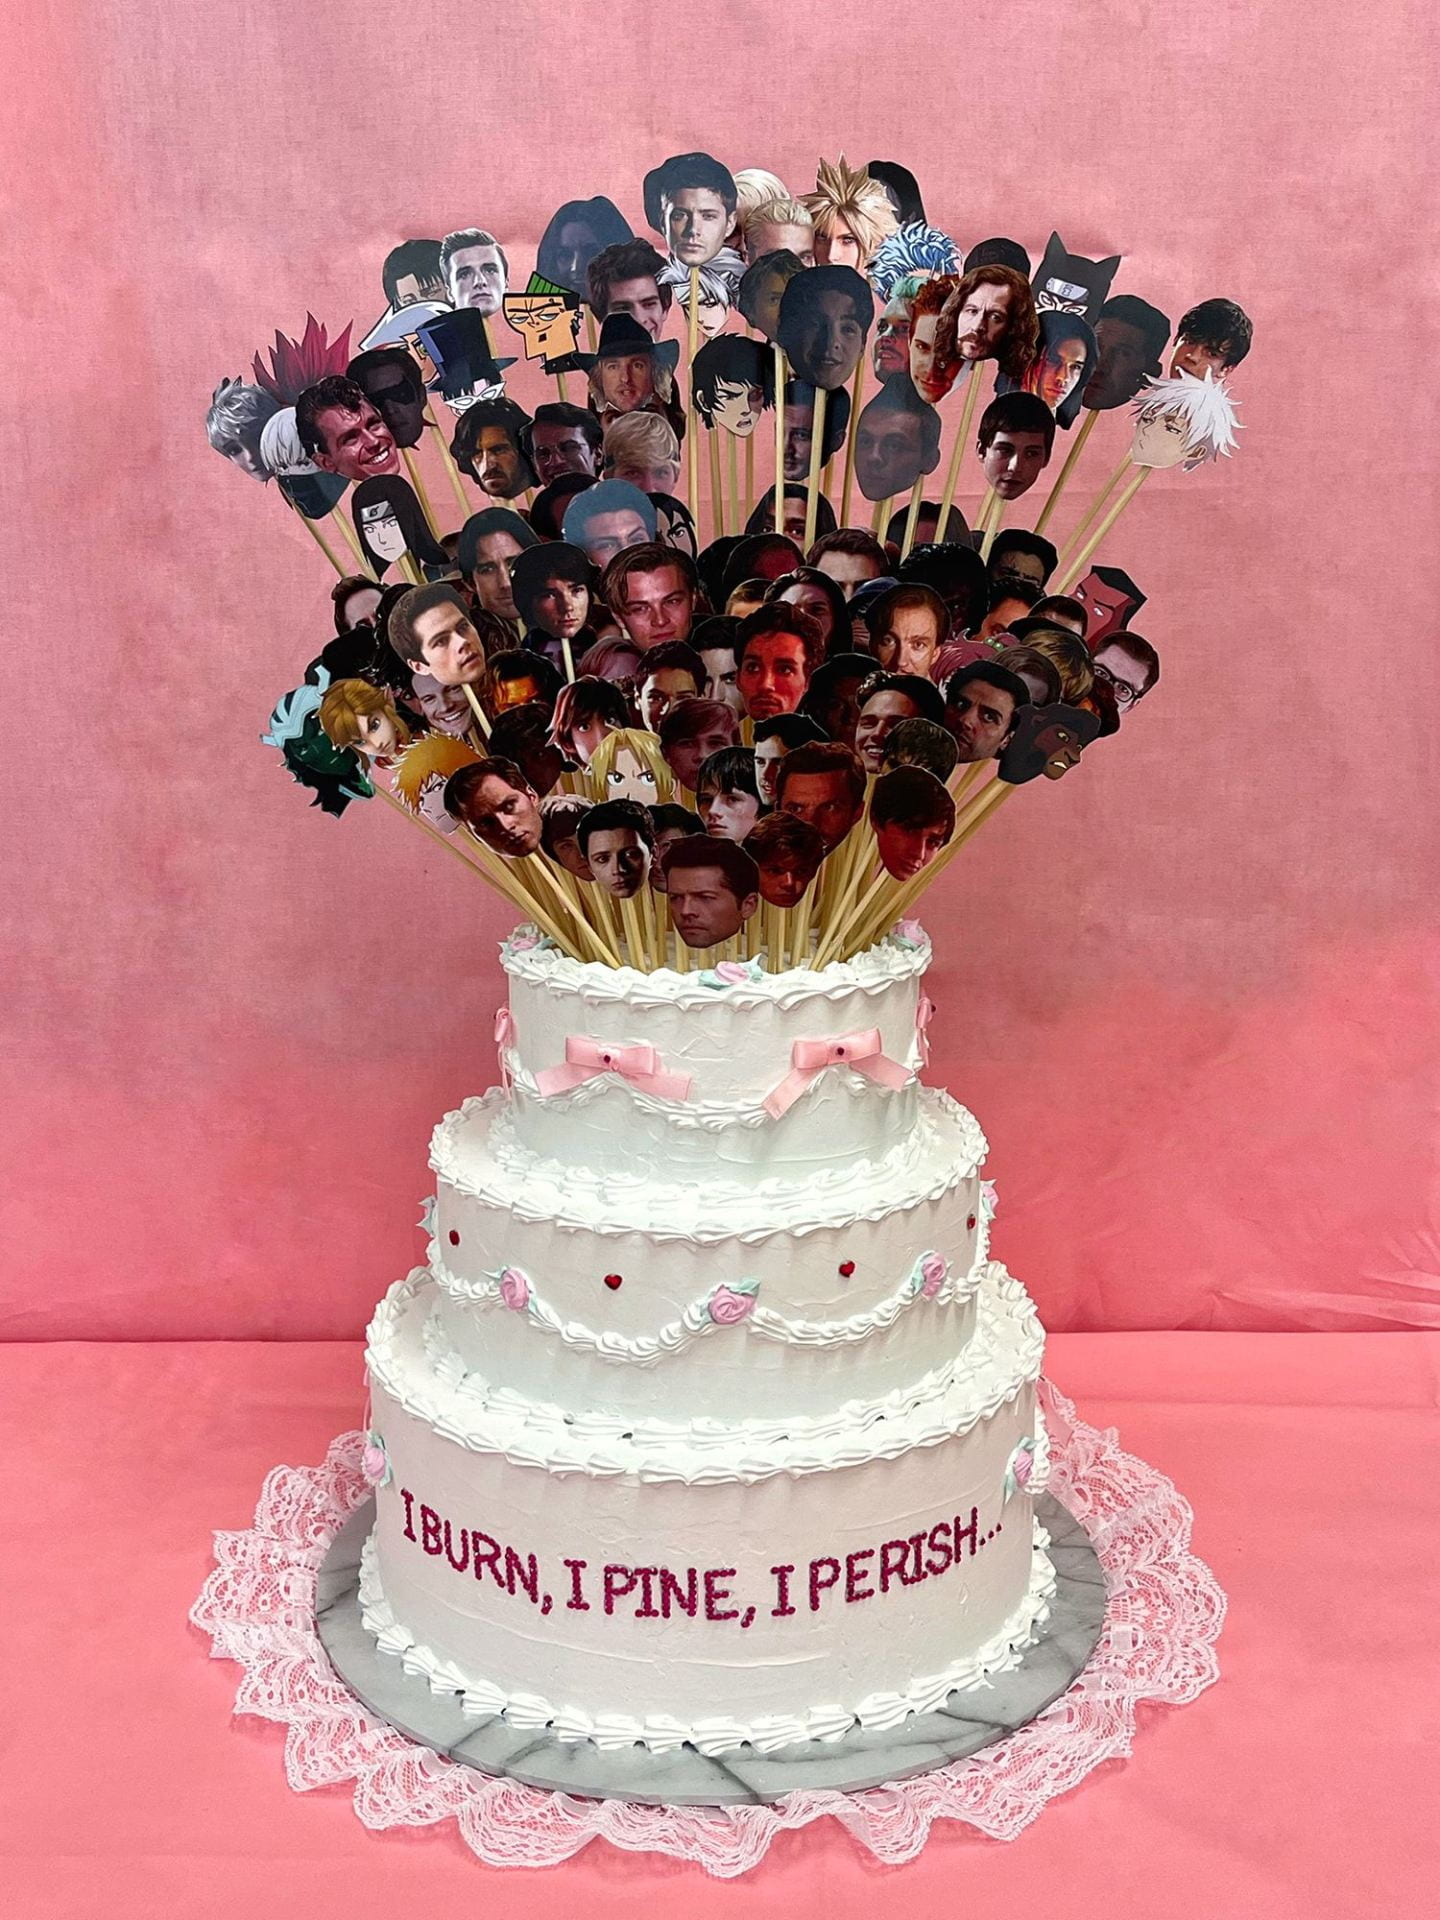 3 tiered wedding cake, featuring a series of cake toppers along with rhinestone text reading 'i burn, i pine, i perish...'